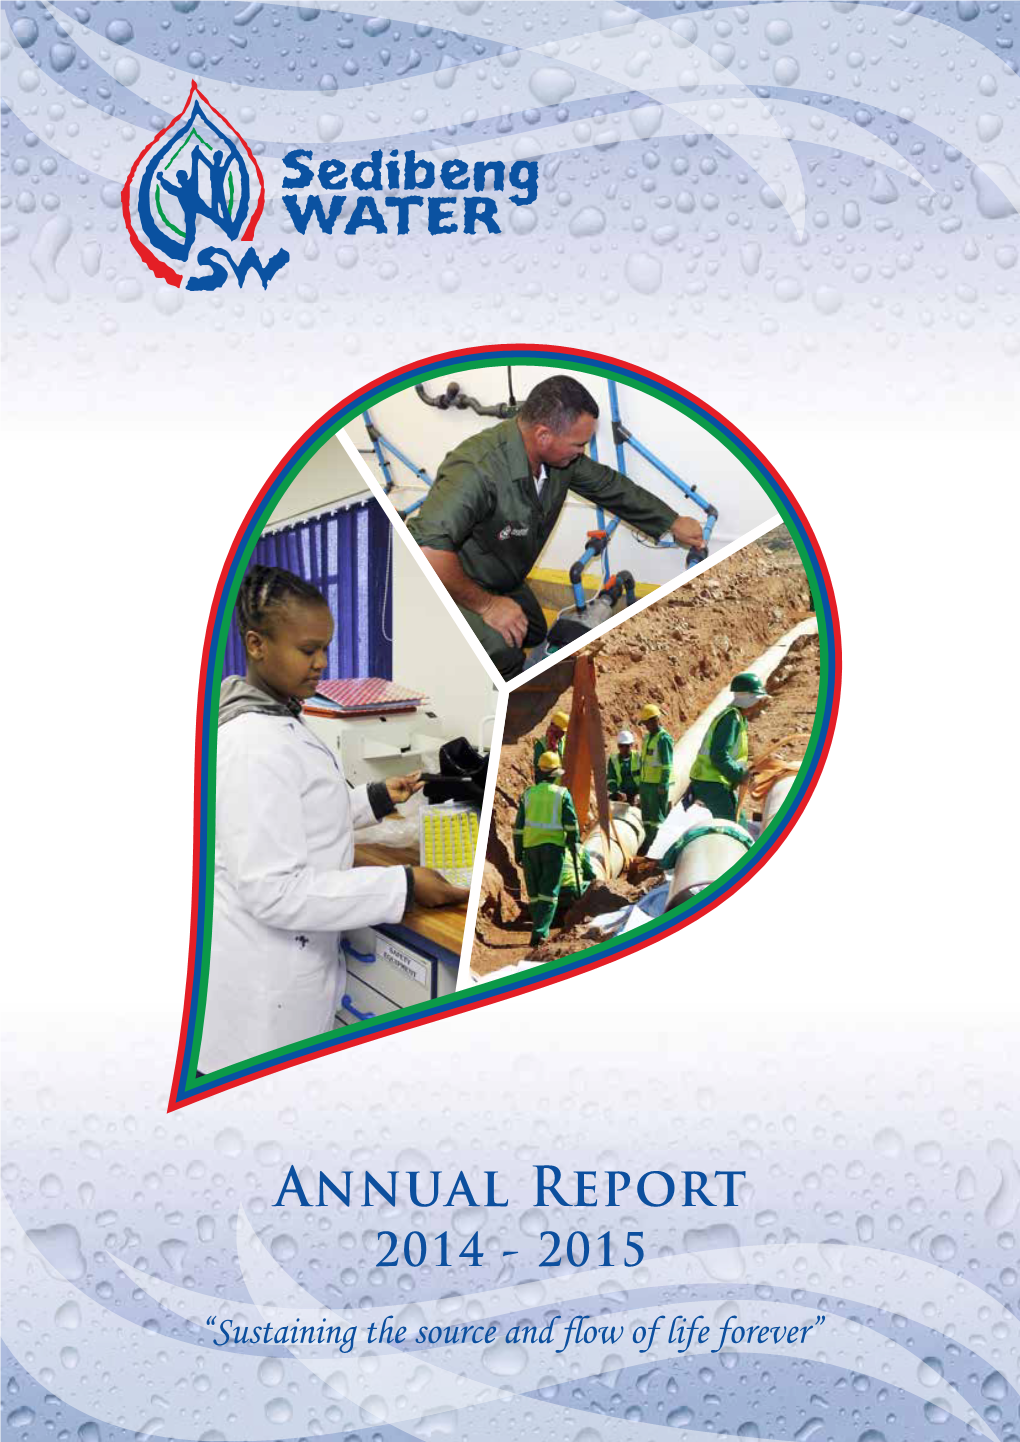 Annual Report 2014 - 2015 “Sustaining the Source and Flow of Life Forever”